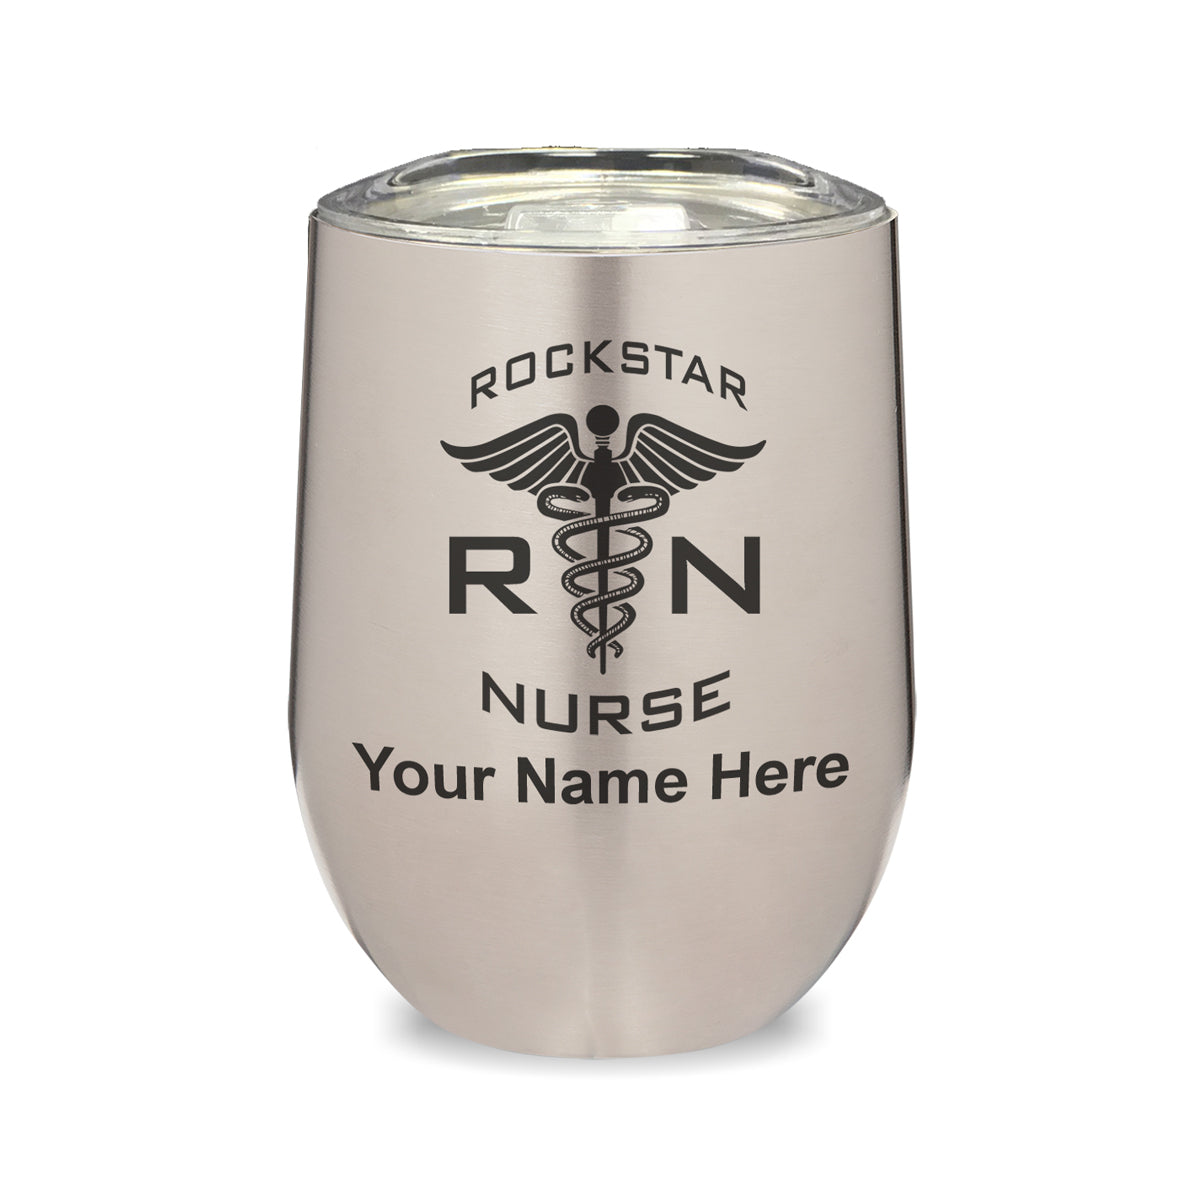 LaserGram Double Wall Stainless Steel Wine Glass, RN Rockstar Nurse, Personalized Engraving Included